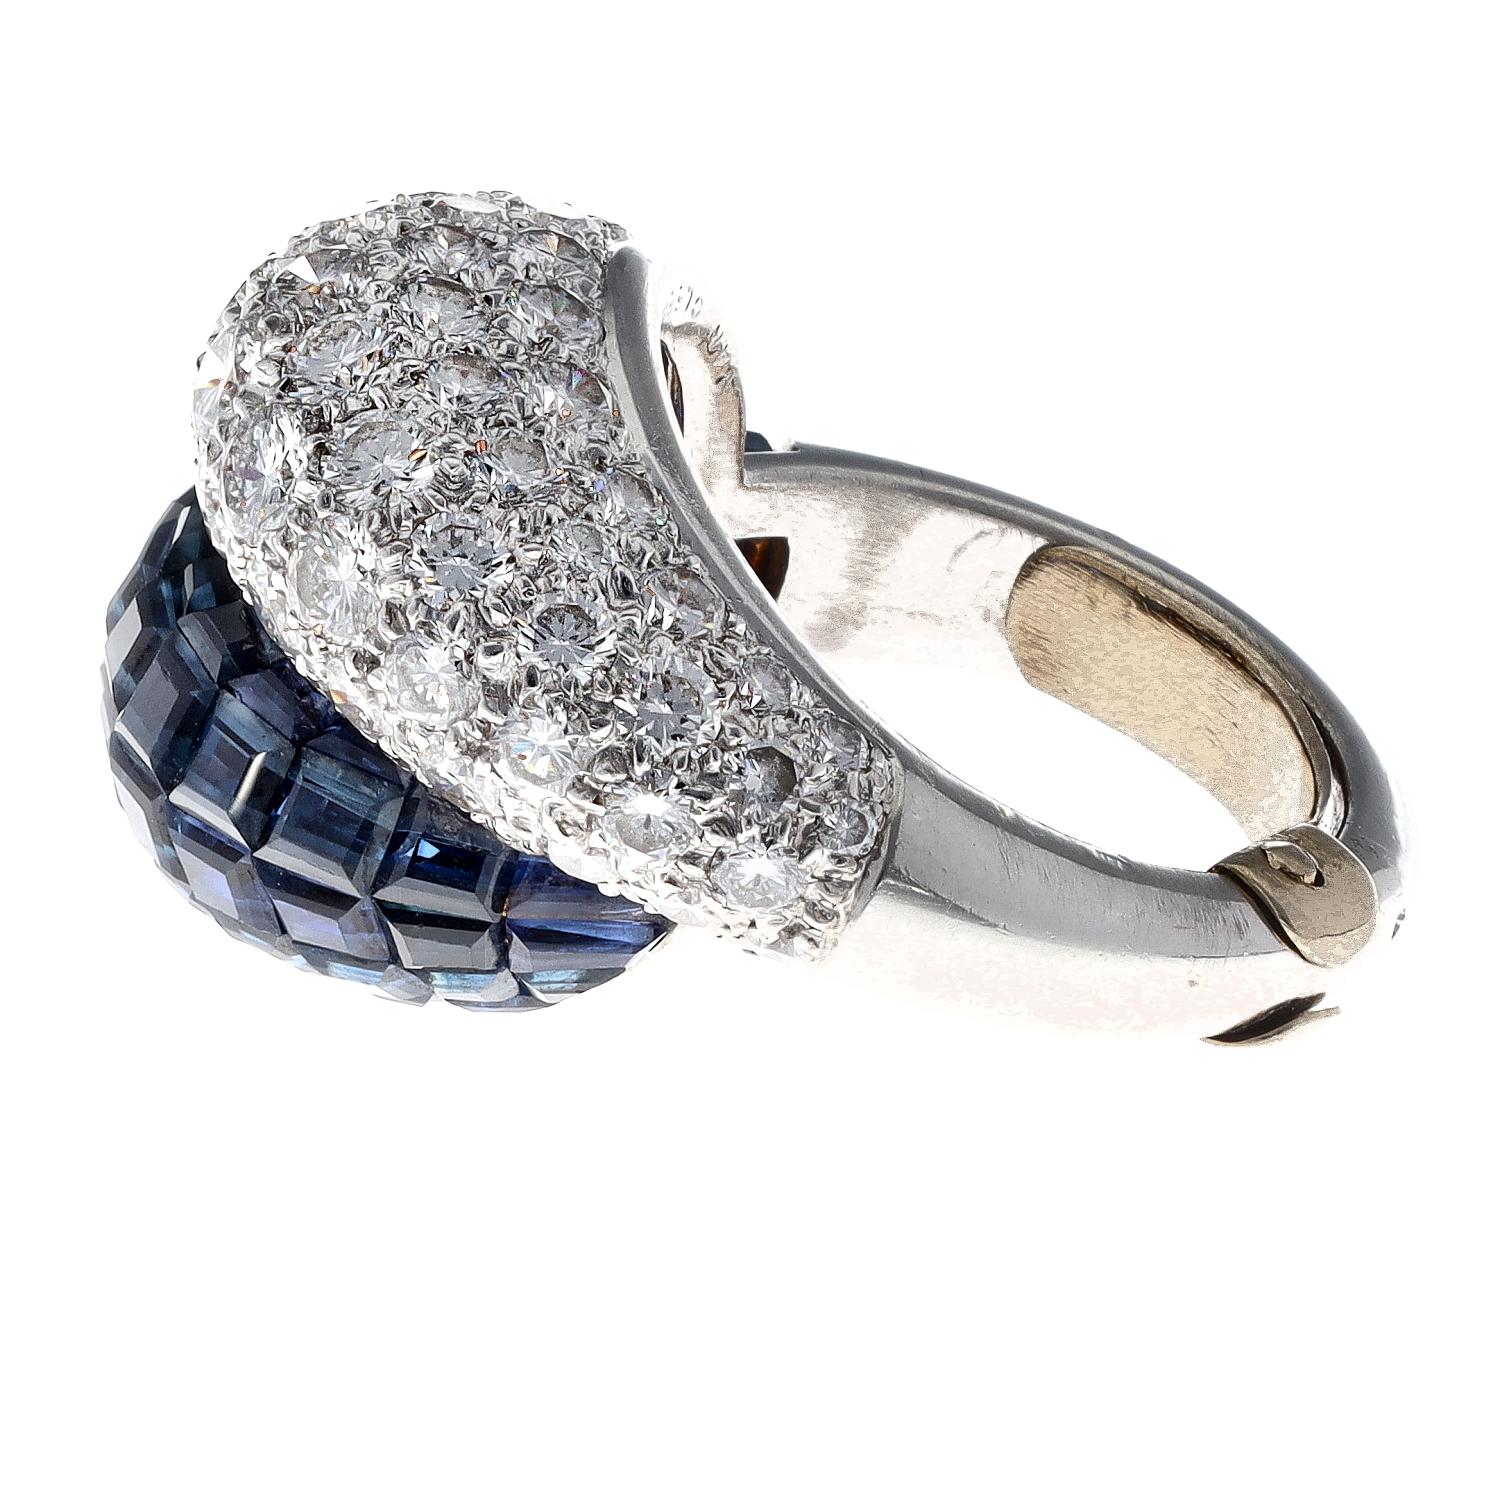 Van Cleef & Arpels Paris Invisibly Set Diamond Sapphire Double Boule Ring

From Our Signed Jewels Vintage Collection.
Invisible sapphires and diamonds set in platinum  Fully signed Van Cleef & Arpels and marked.
